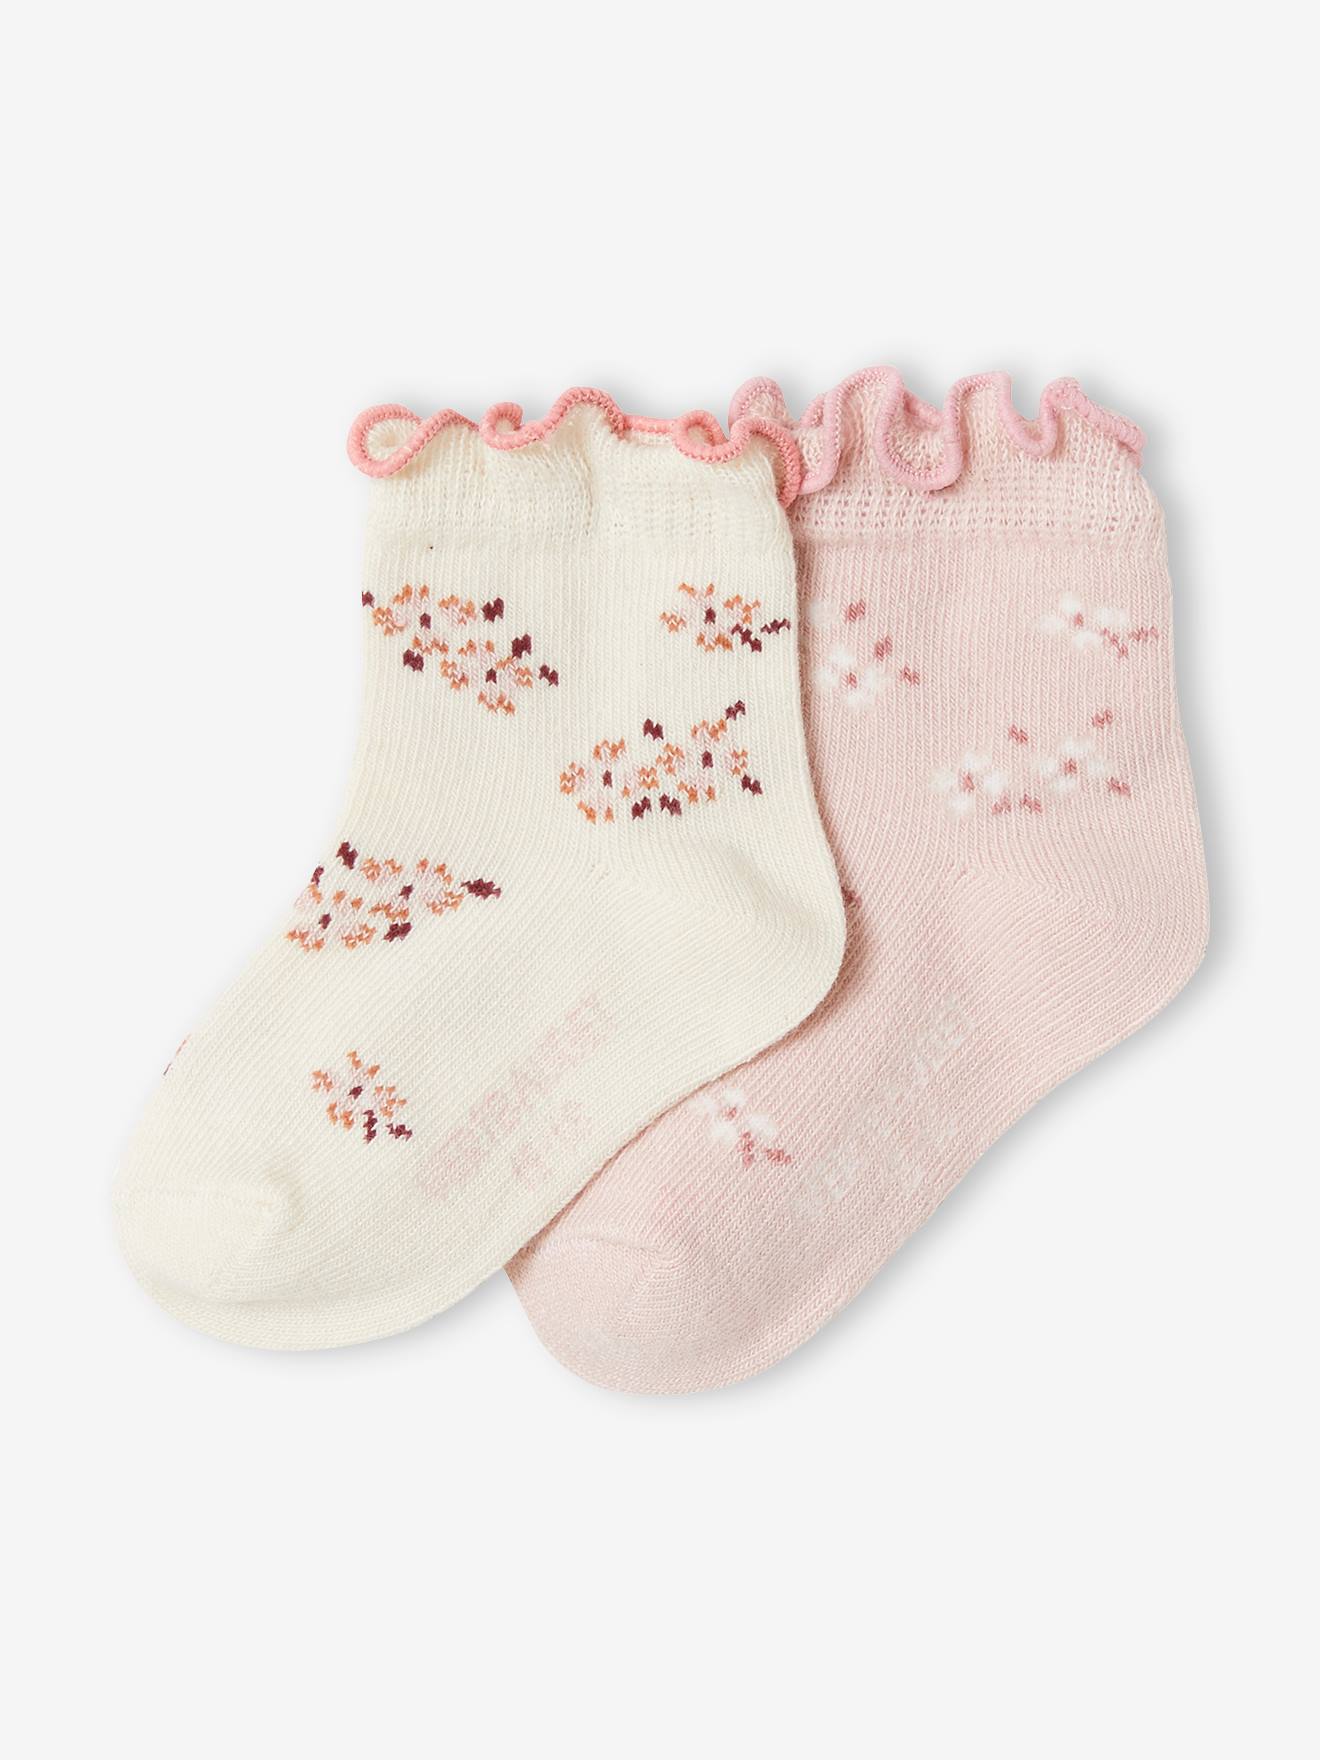 4 pairs of Baby Girls Floral socks 